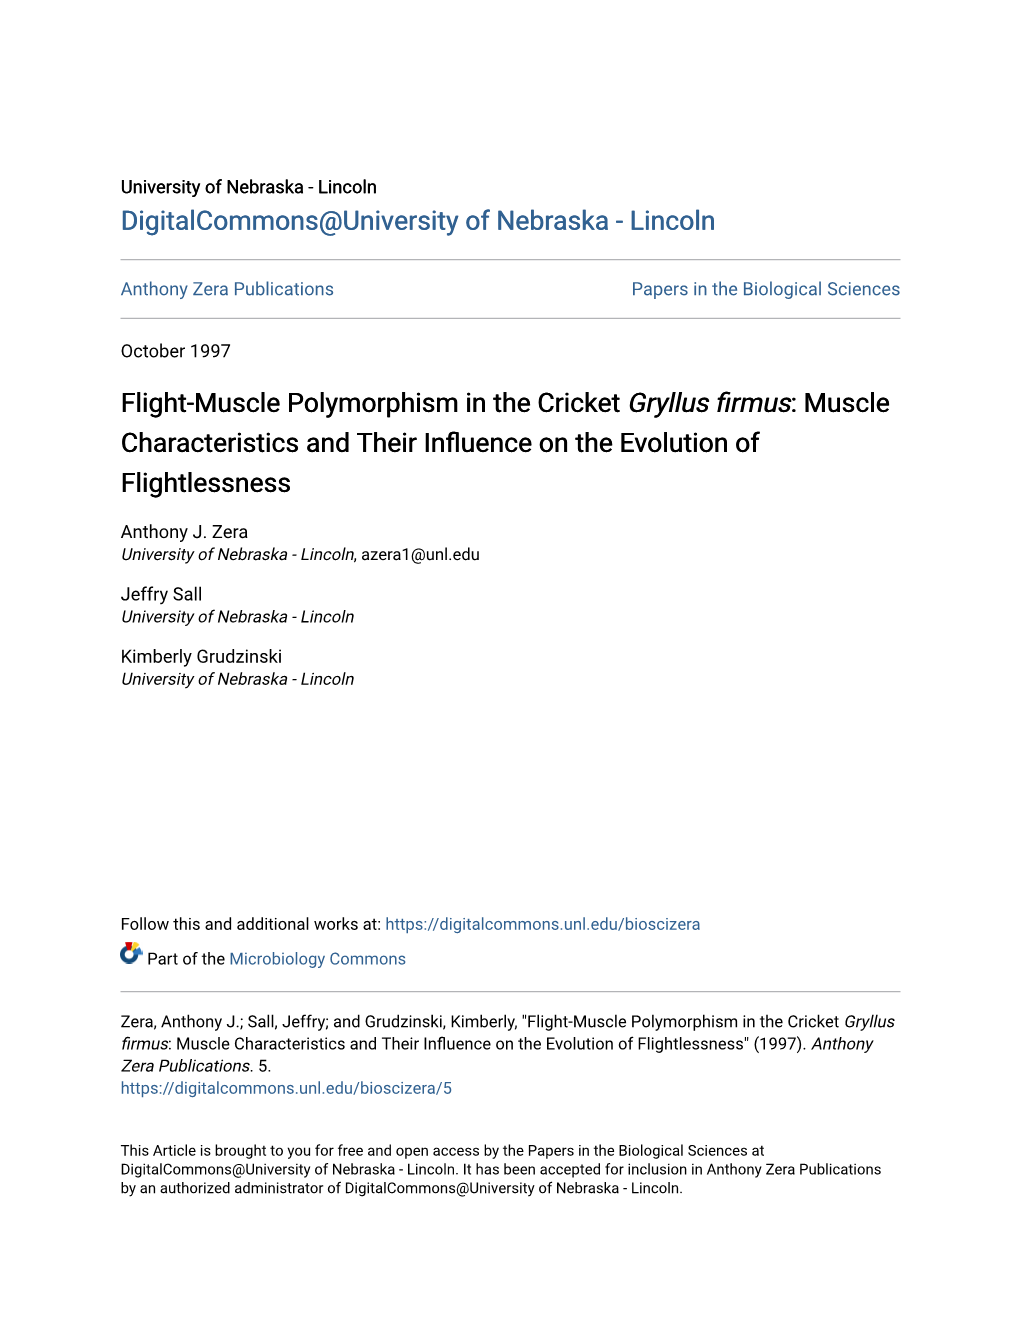 Flight-Muscle Polymorphism in the Cricket Gryllus Firmus: Muscle Characteristics and Their Influence on the Ve Olution of Flightlessness